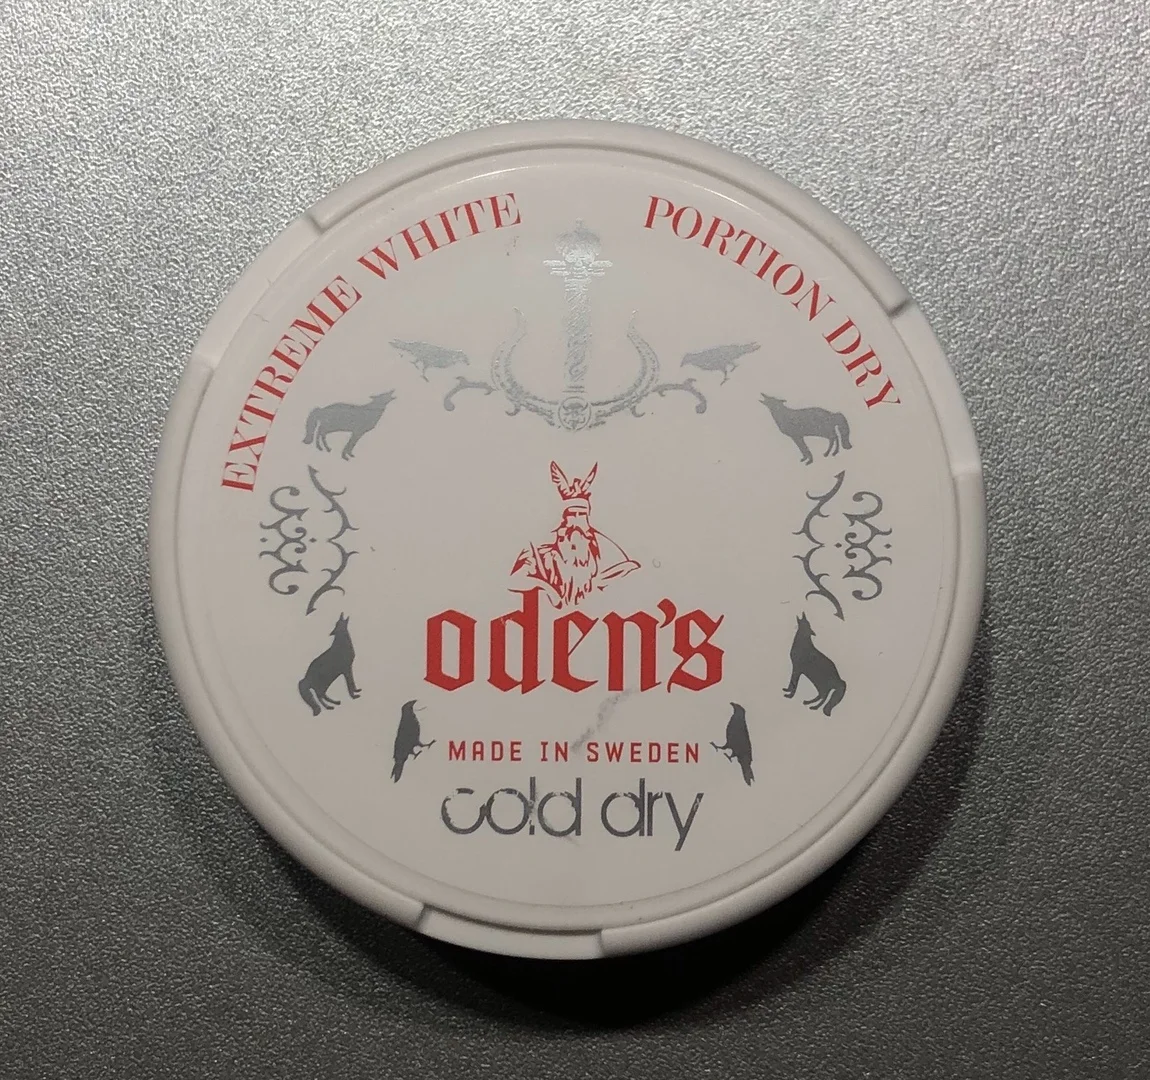 Odens cold